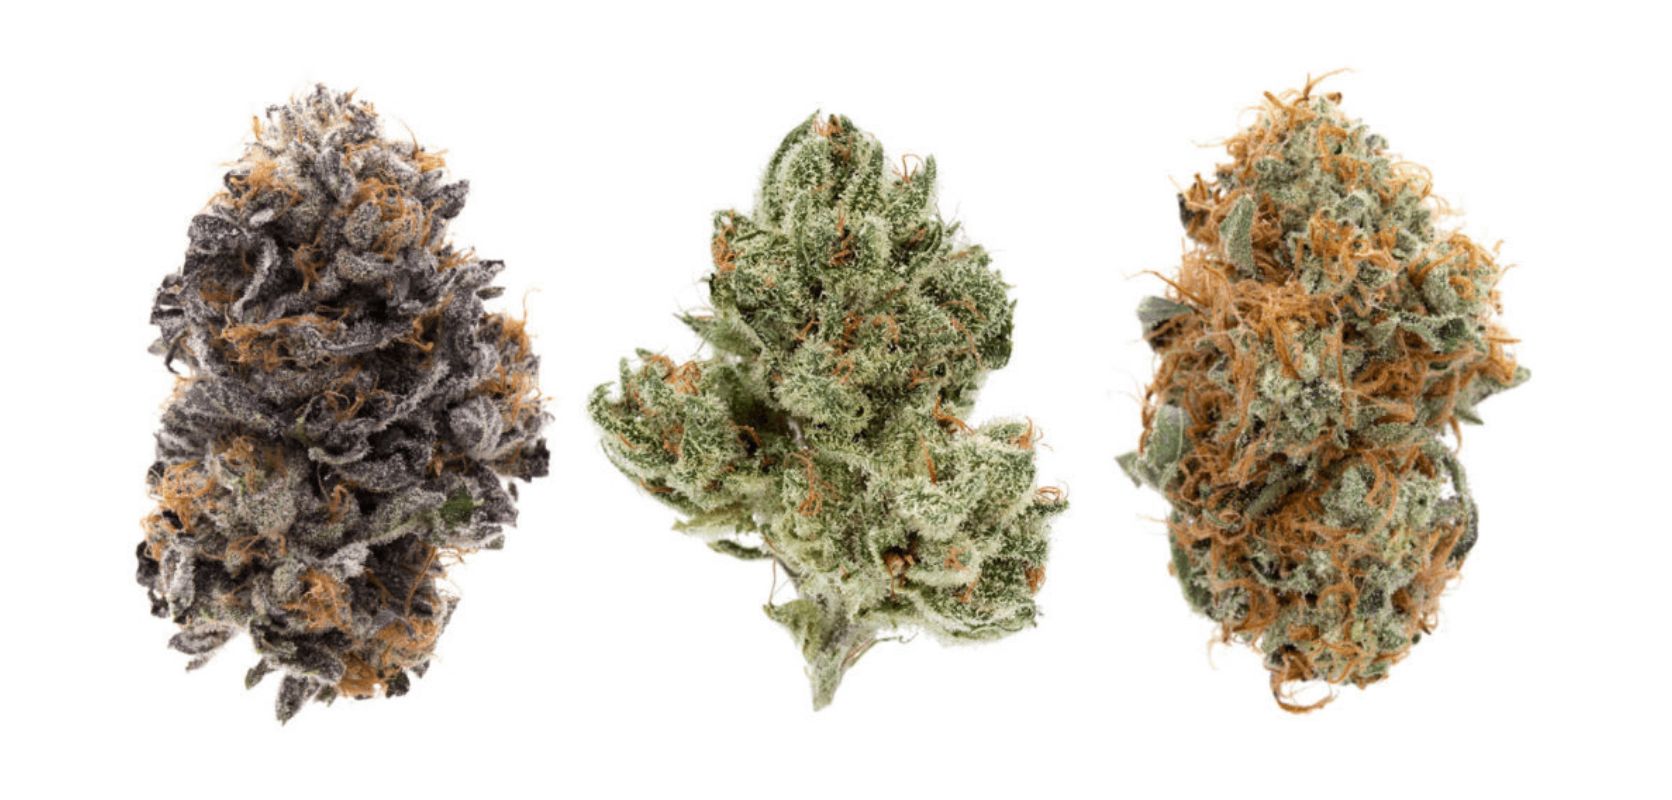 Before taking a look at the top 10 different strains of weed for relaxation and pain relief, let's first discuss the three key flower types: Sativa, Indica, and hybrids.